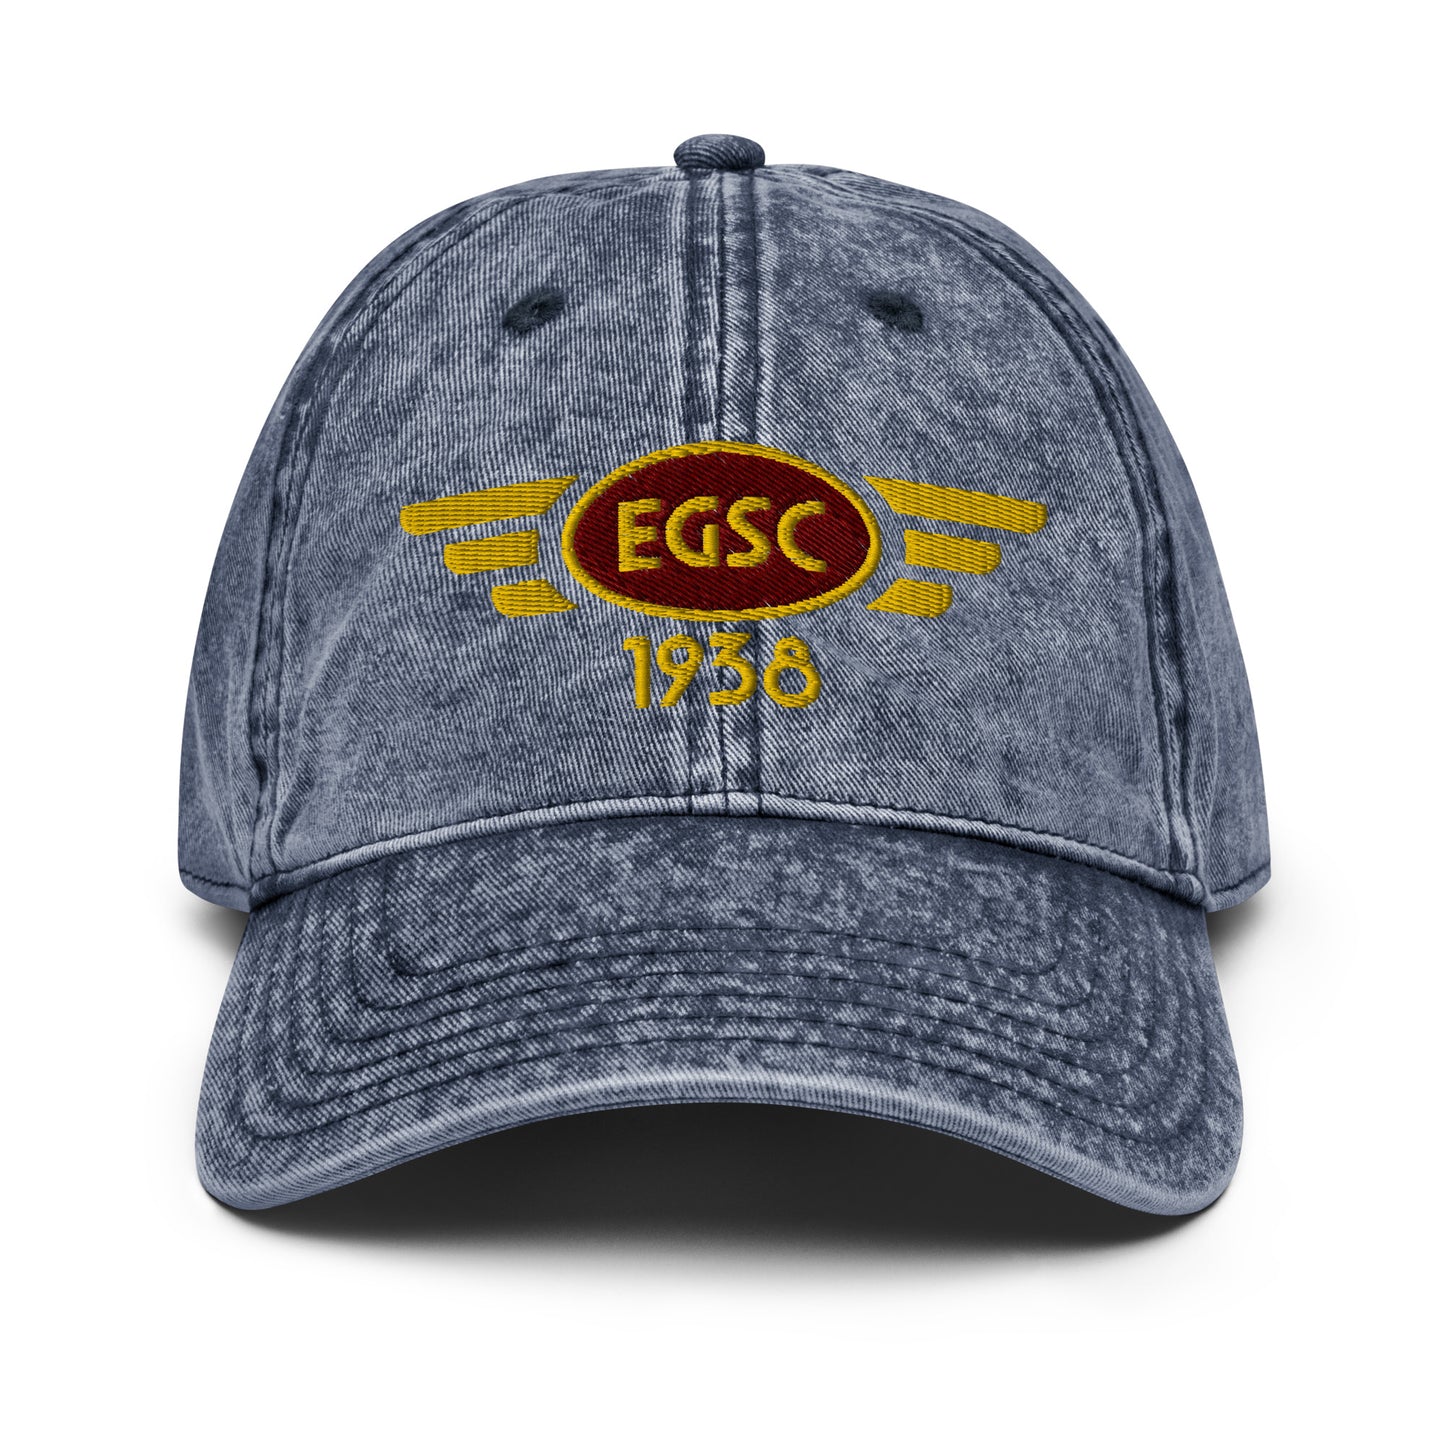 Blue cotton twill baseball cap with embroidered vintage style aviation logo for Cambridge Airport.